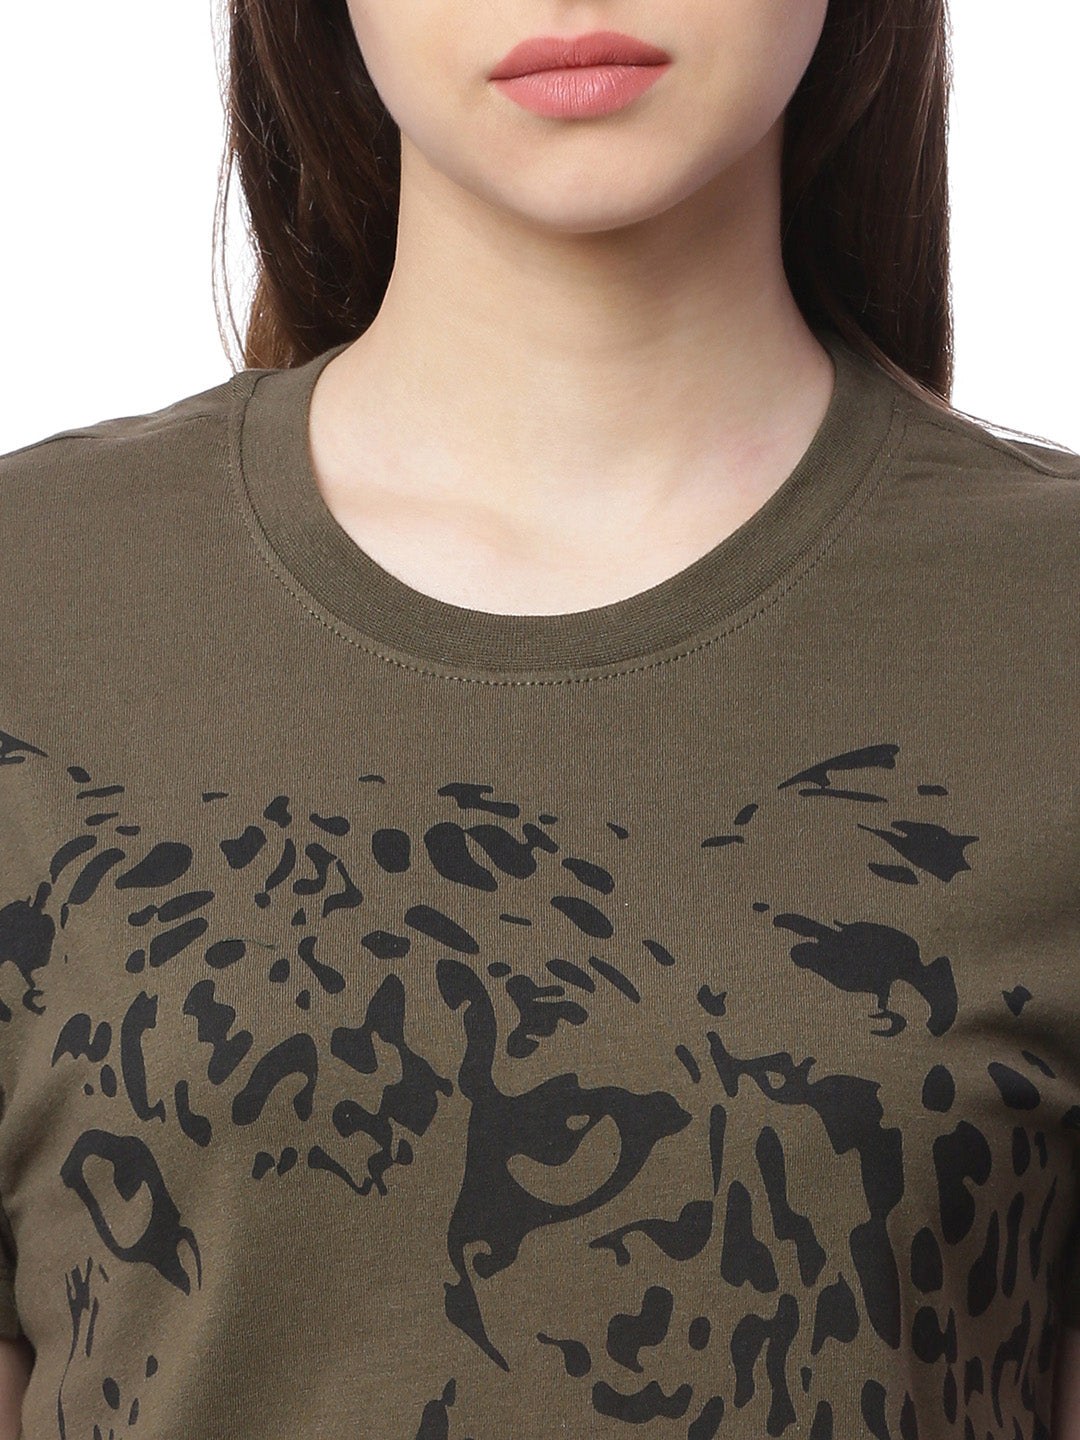 Wolfpack Women Army Green Printed T-Shirt Wolfpack